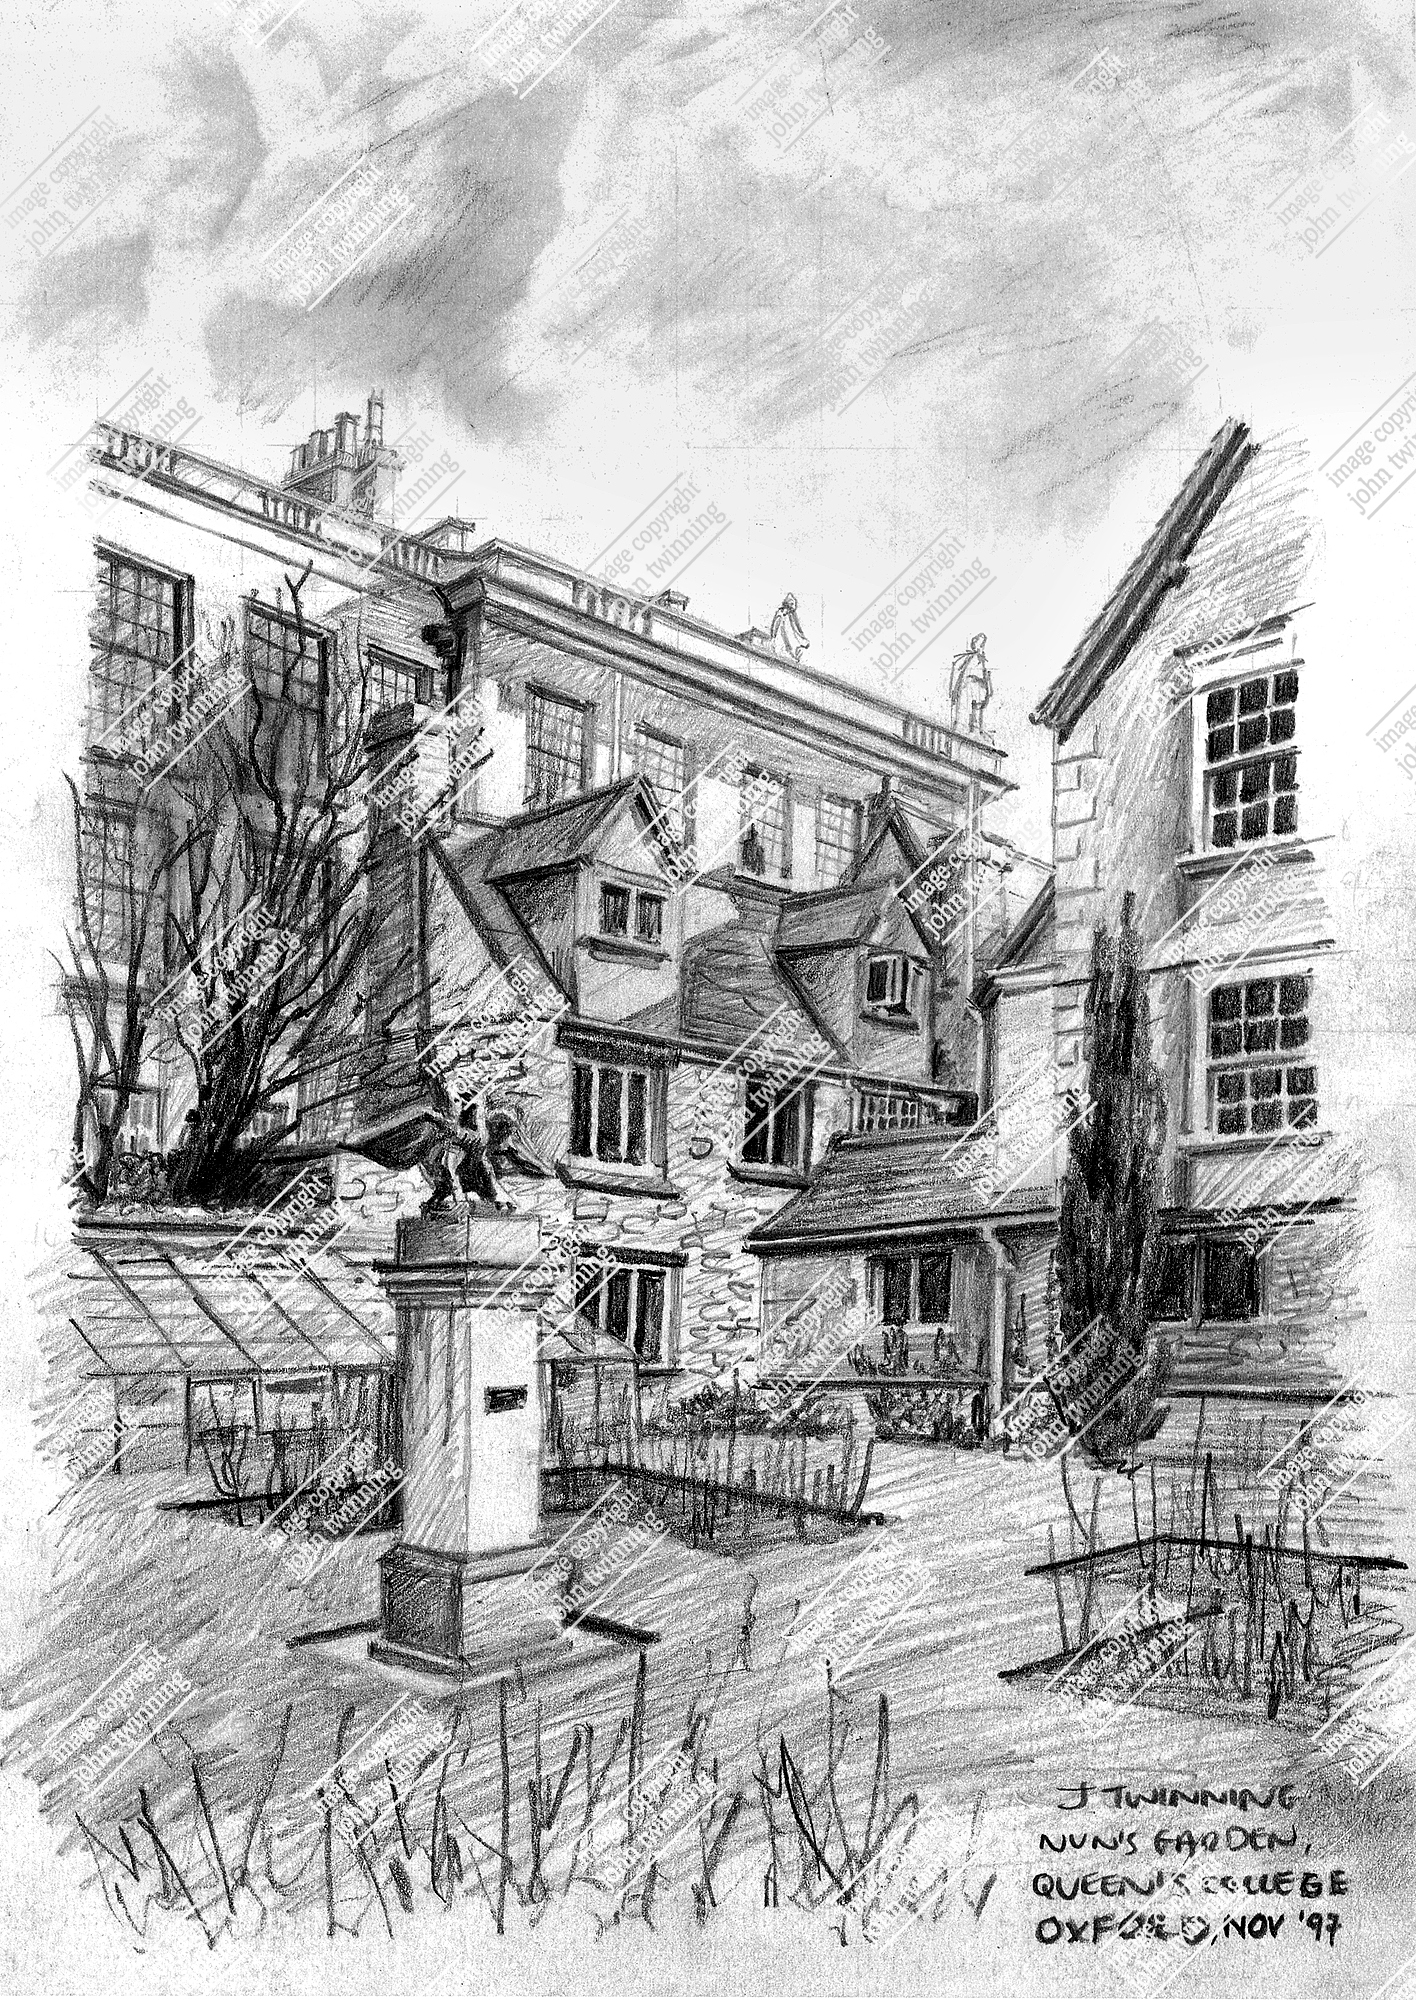 ‘The Nun’s Garden’ [portrait] – art print from a pencil drawing of this view of the queen’s college, oxford